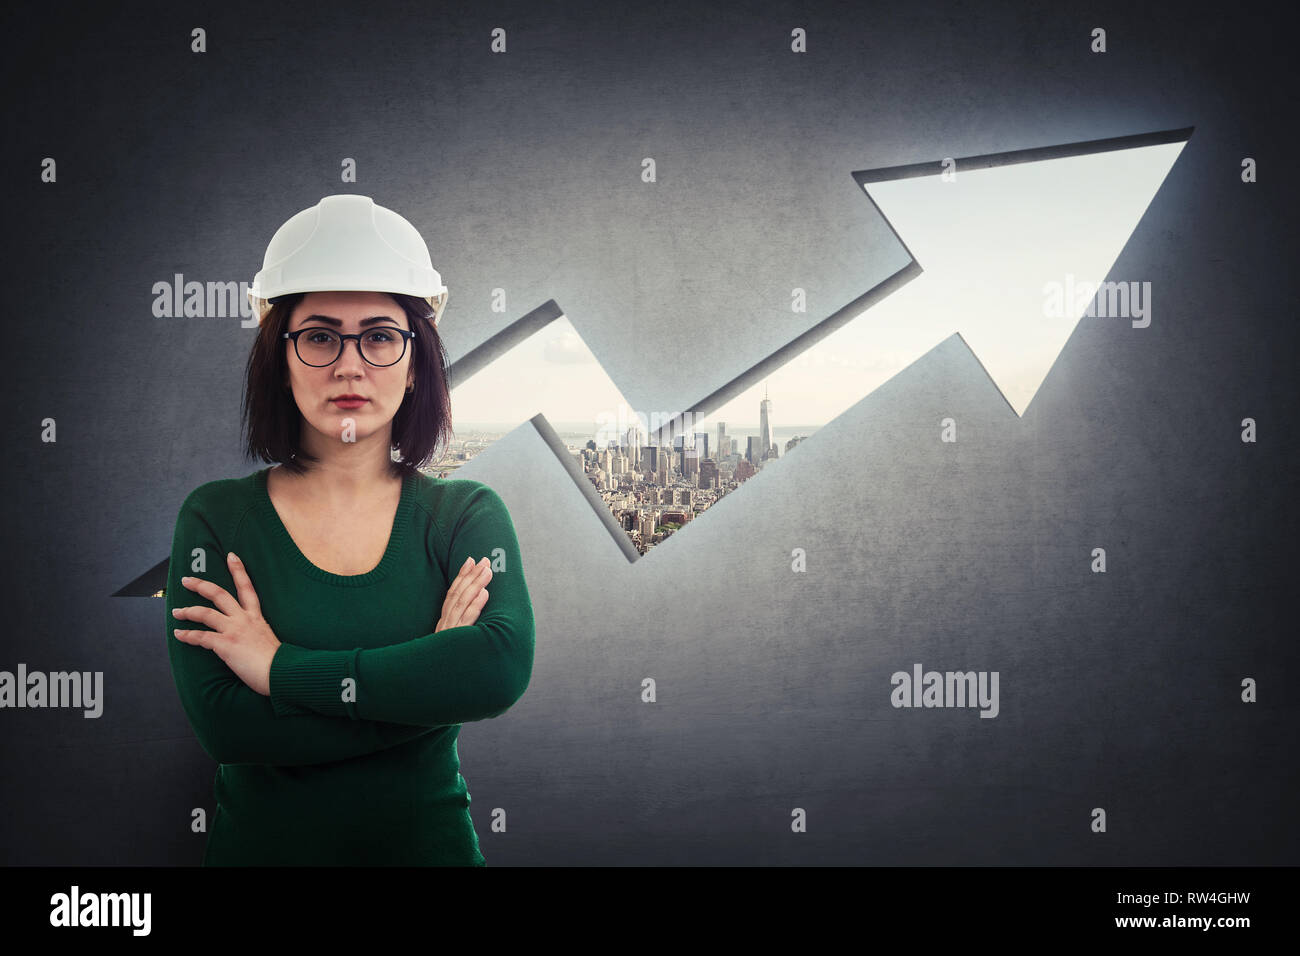 Woman engineer, wearing protective helmet, holding arms crossed, thoughtful looking over a rising graph arrow shape as a hole in concrete wall with a  Stock Photo